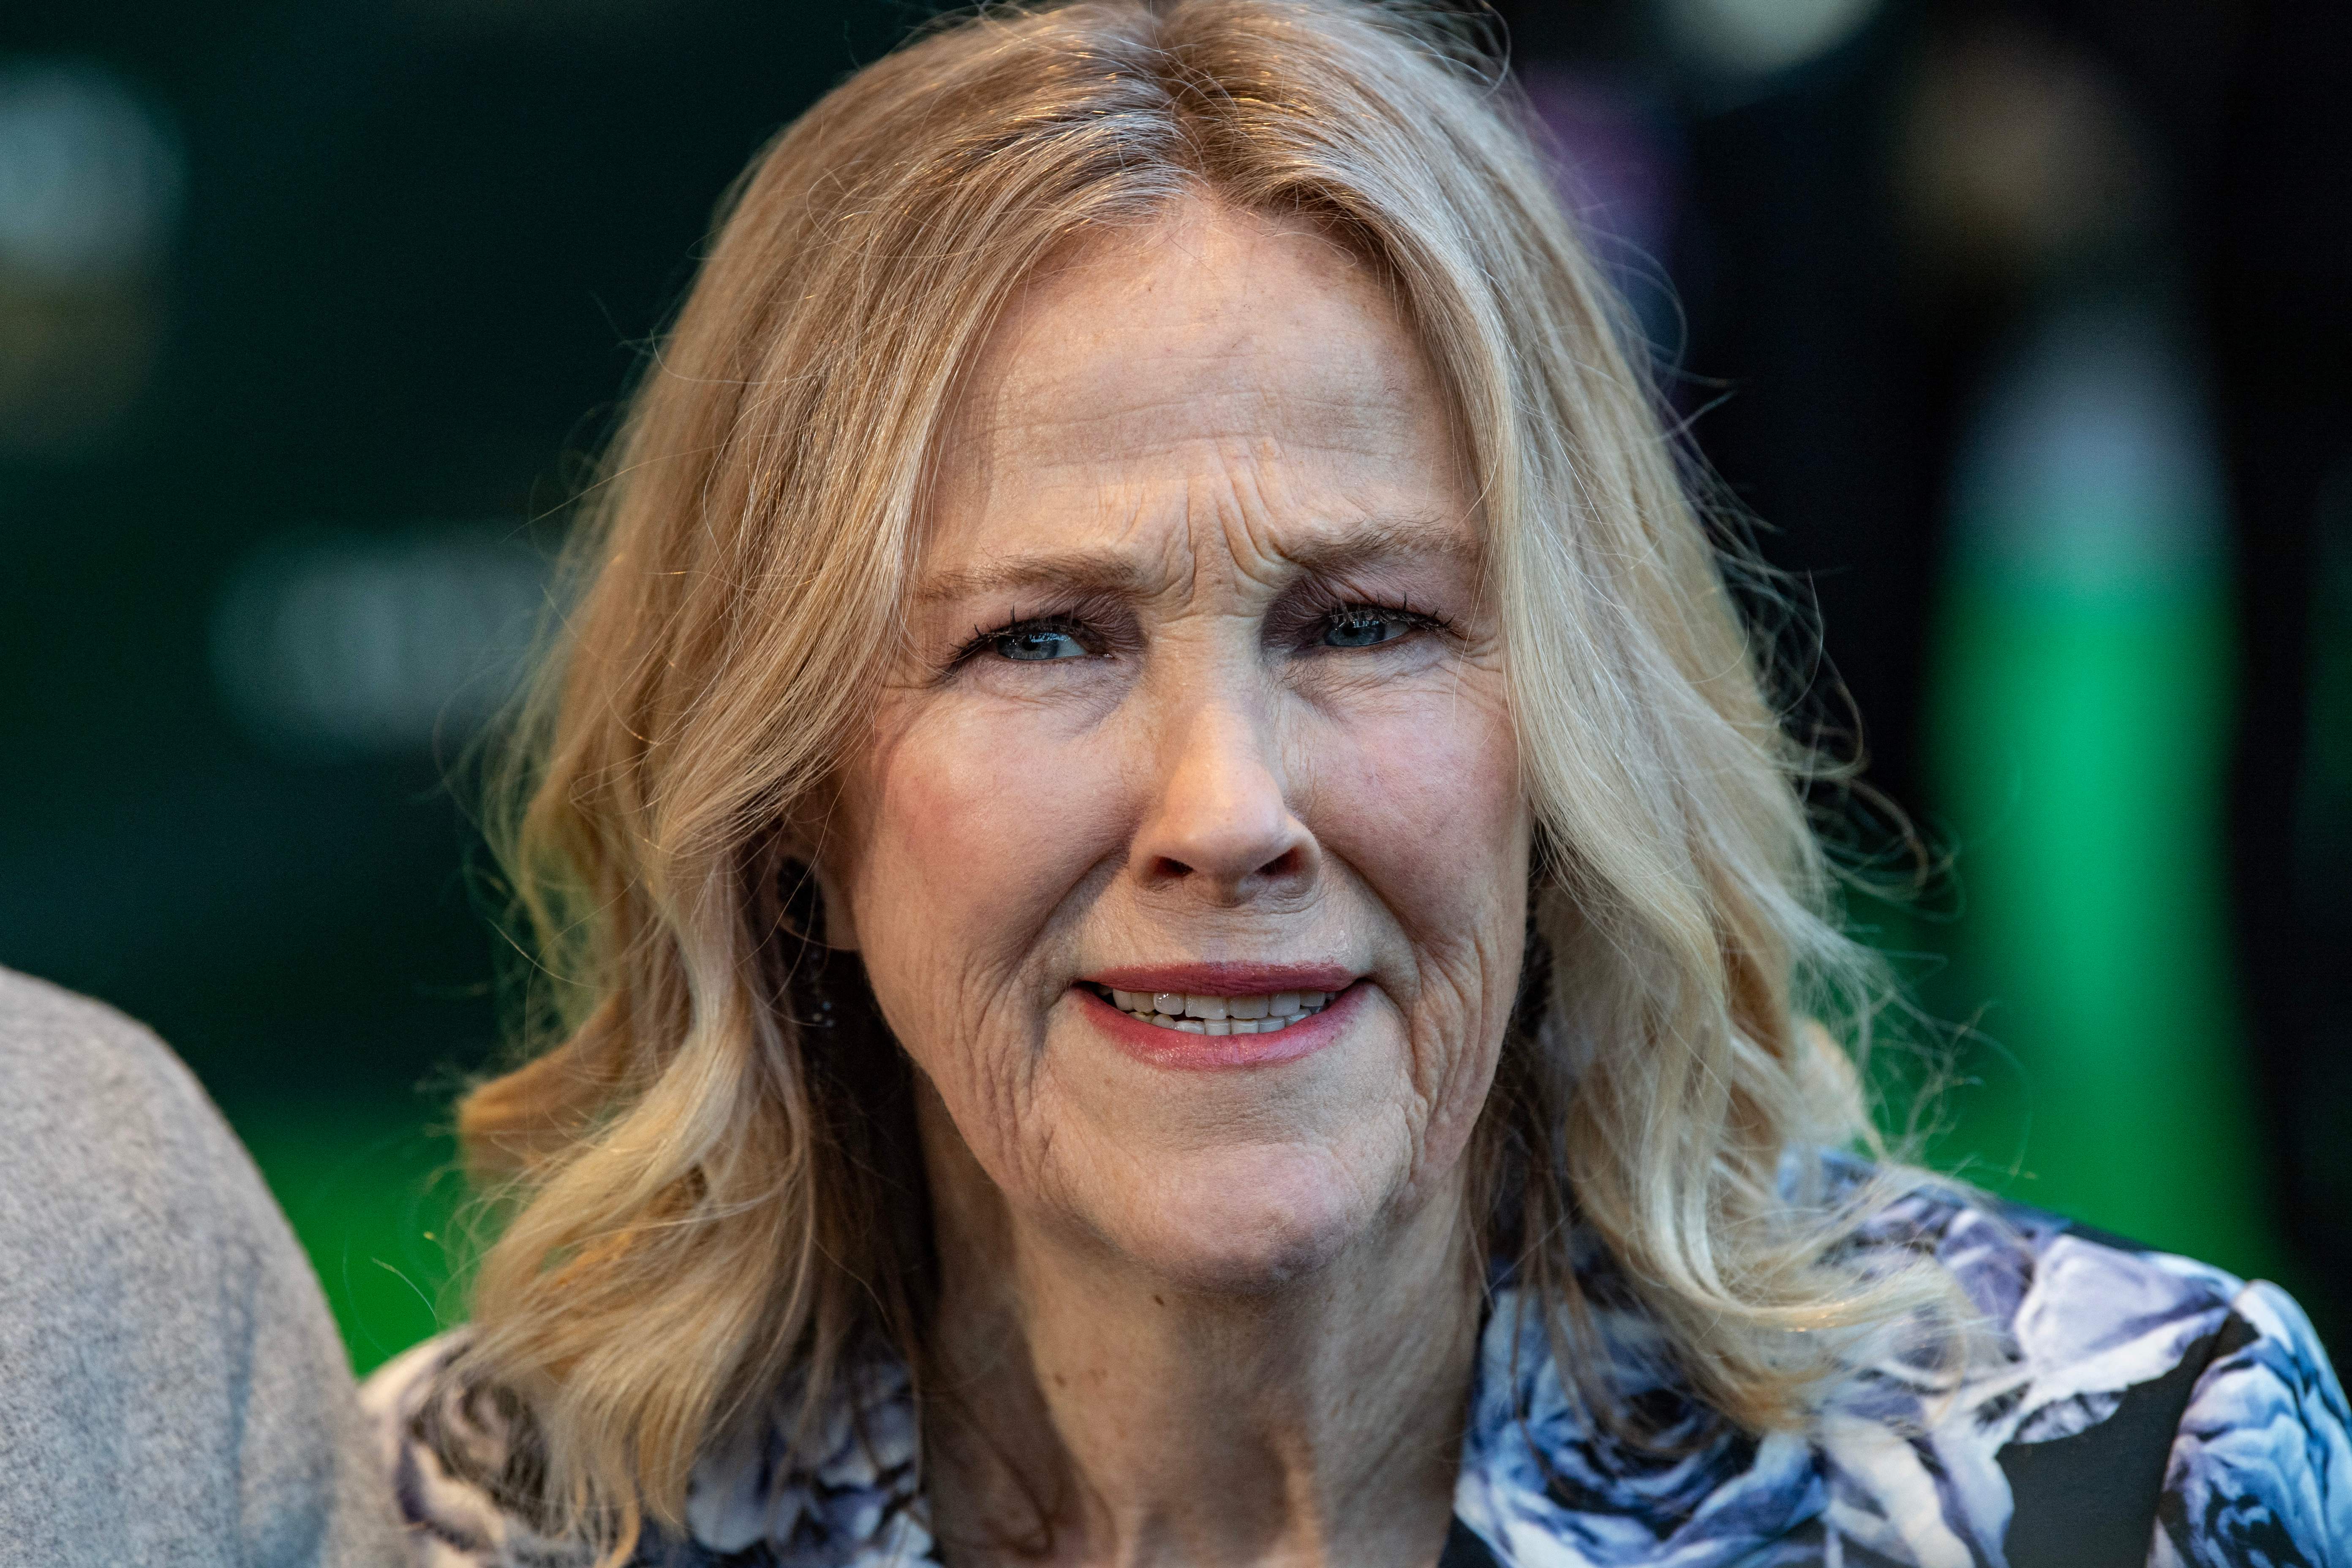 Catherine O'Hara at the Earthshot Prize awards in Boston in 2022 | Source: Getty Images